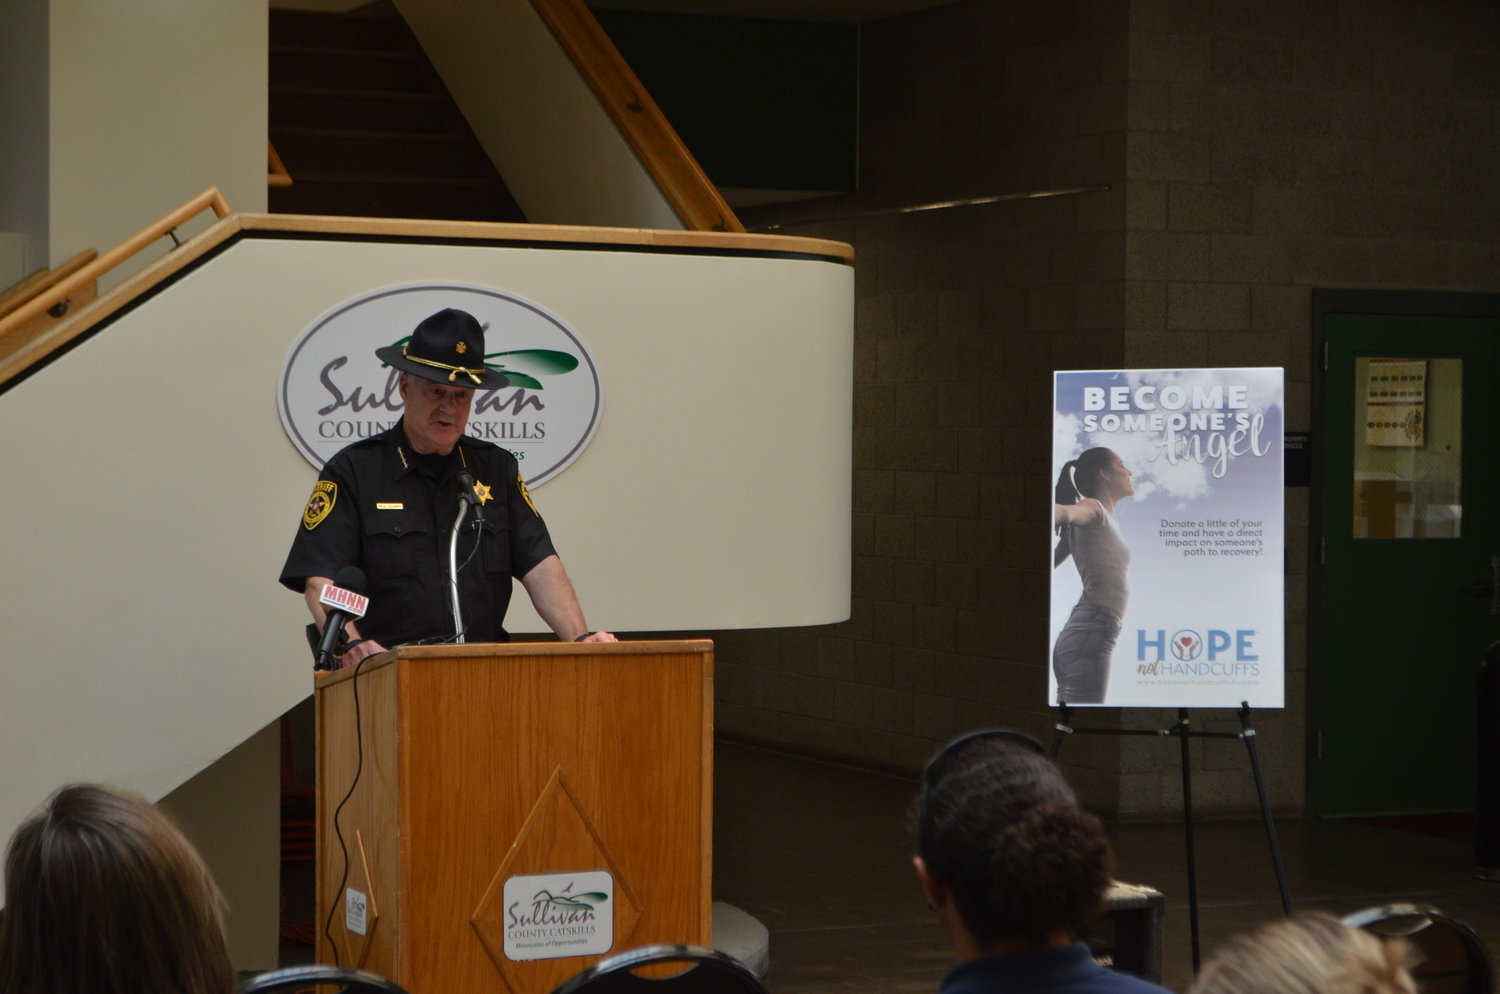 Sullivan County Sheriff Michael A. Schiff describes the benefits of the Hope Not Handcuffs program.